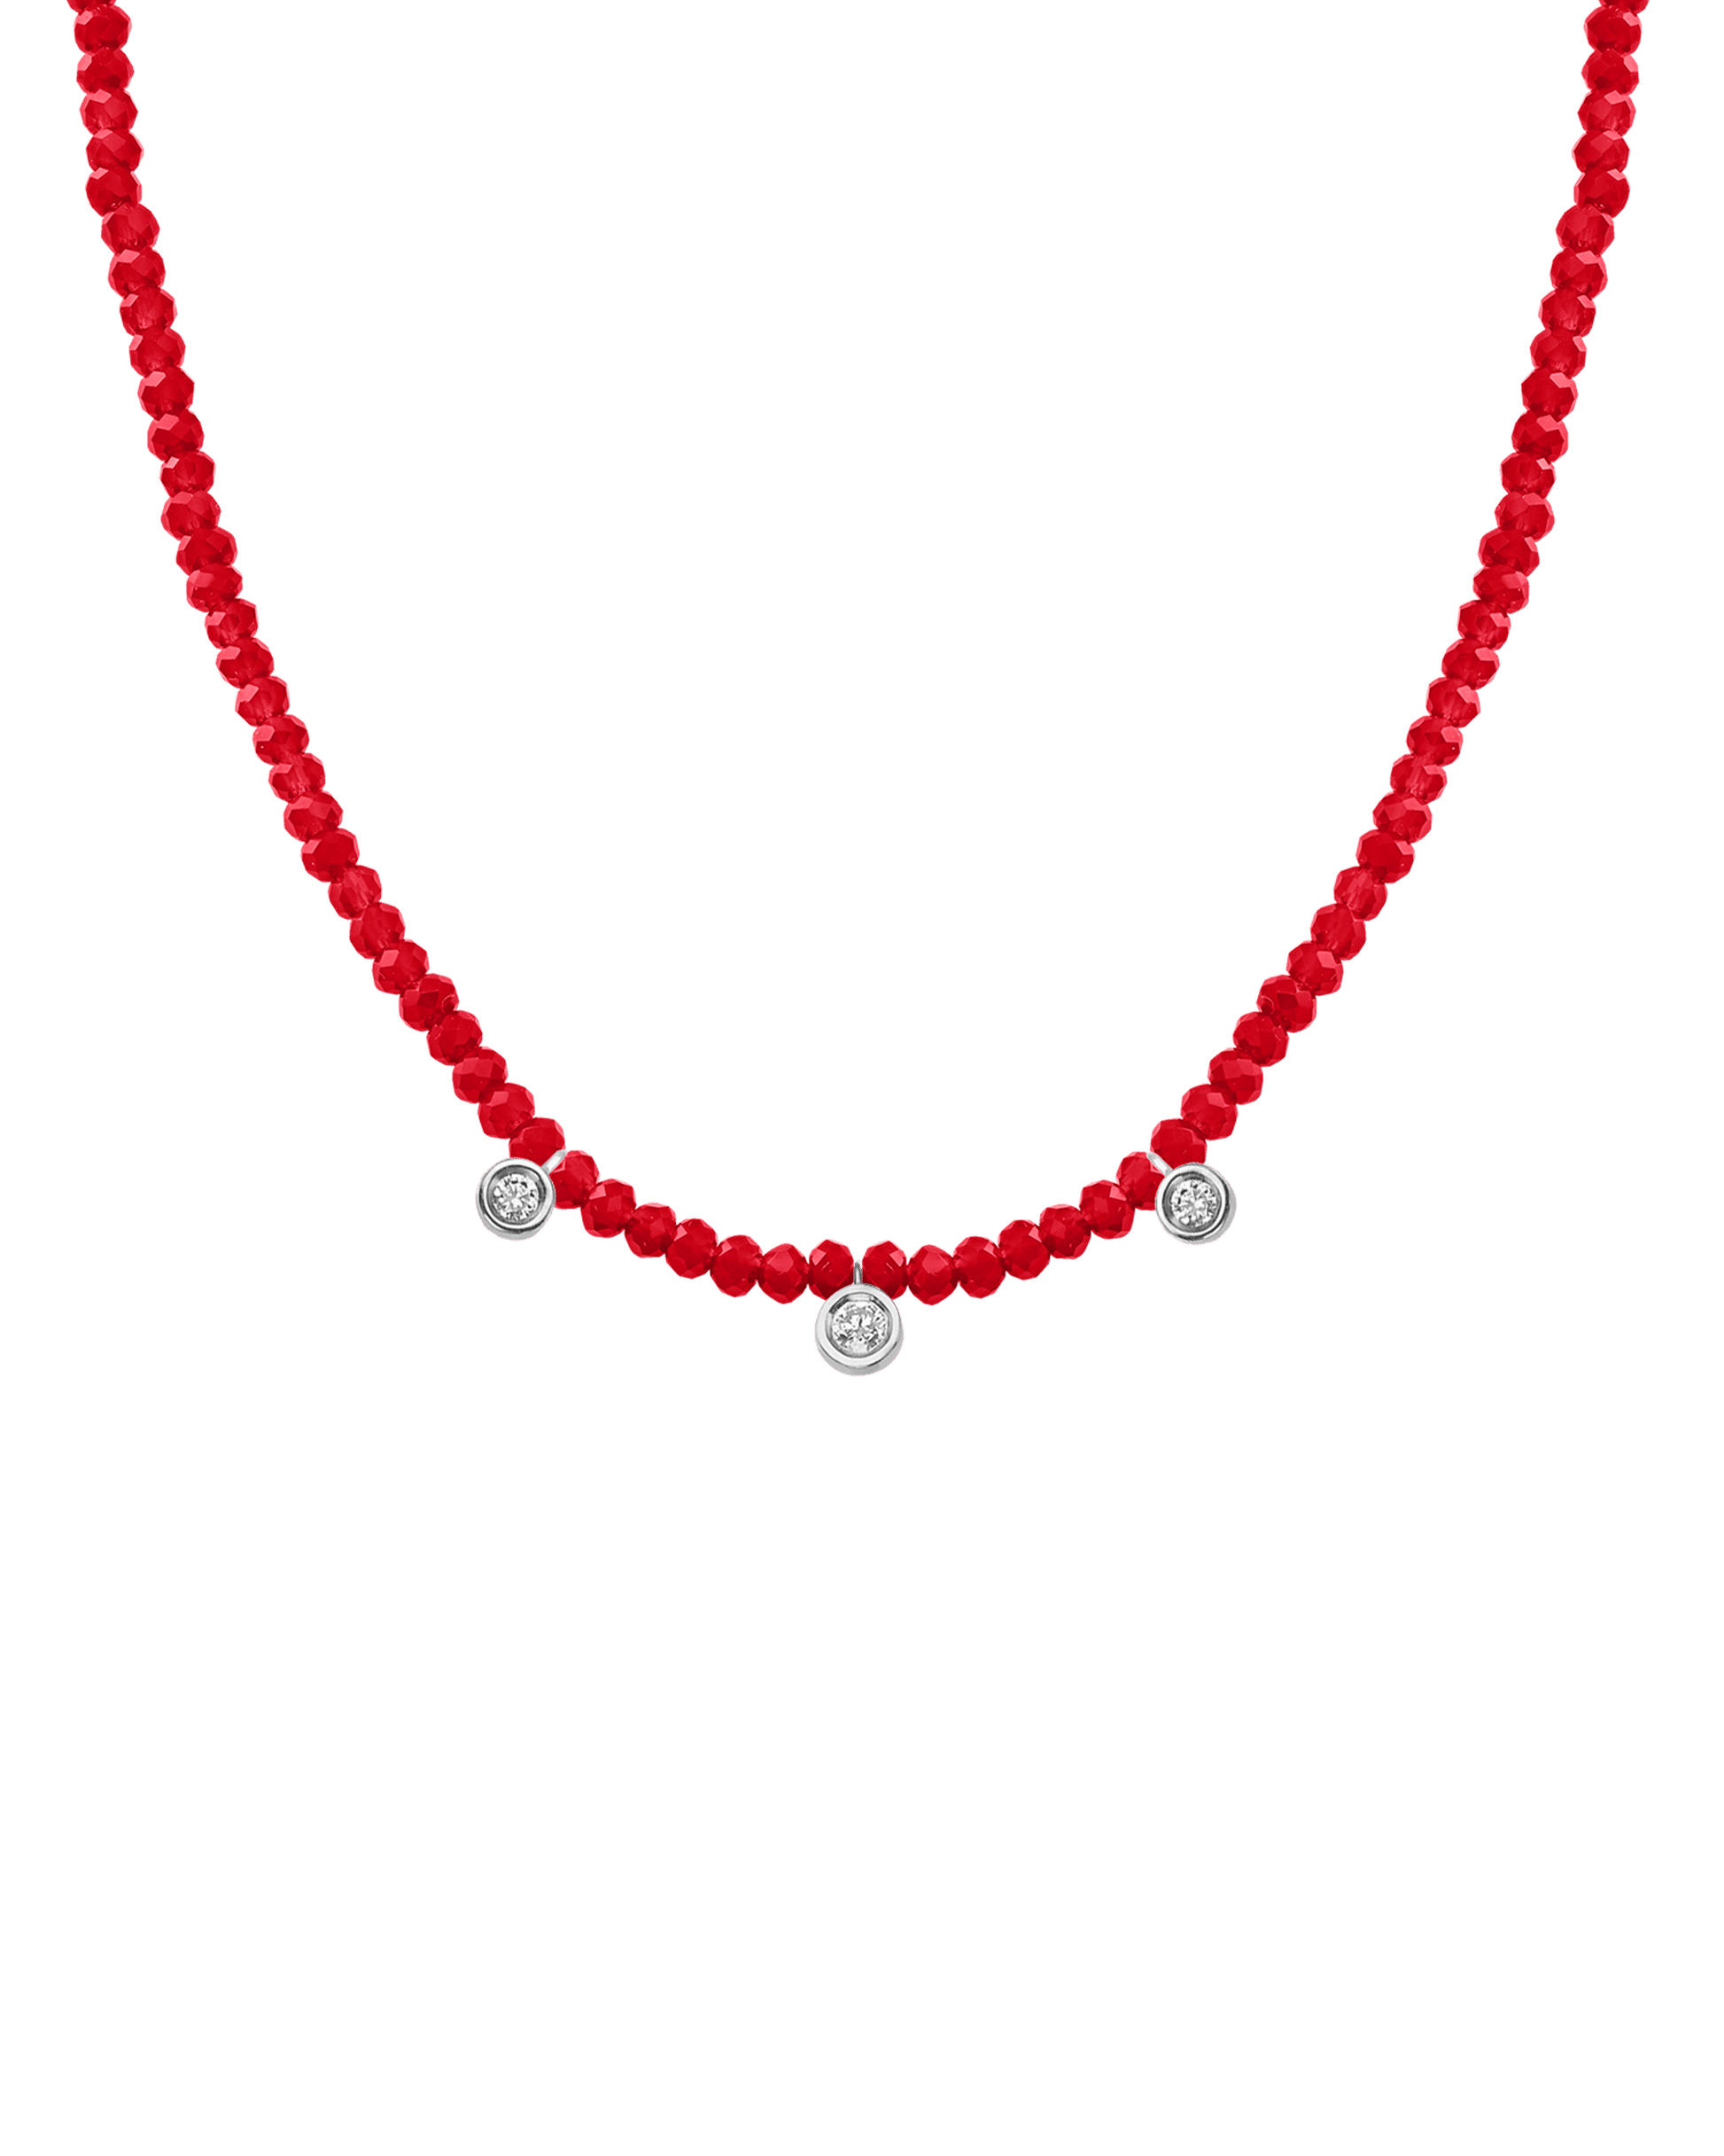 Purple Amethyst Gemstone & Three diamonds Necklace - 14K White Gold Necklaces magal-dev Natural Red Jade 14" - Collar 